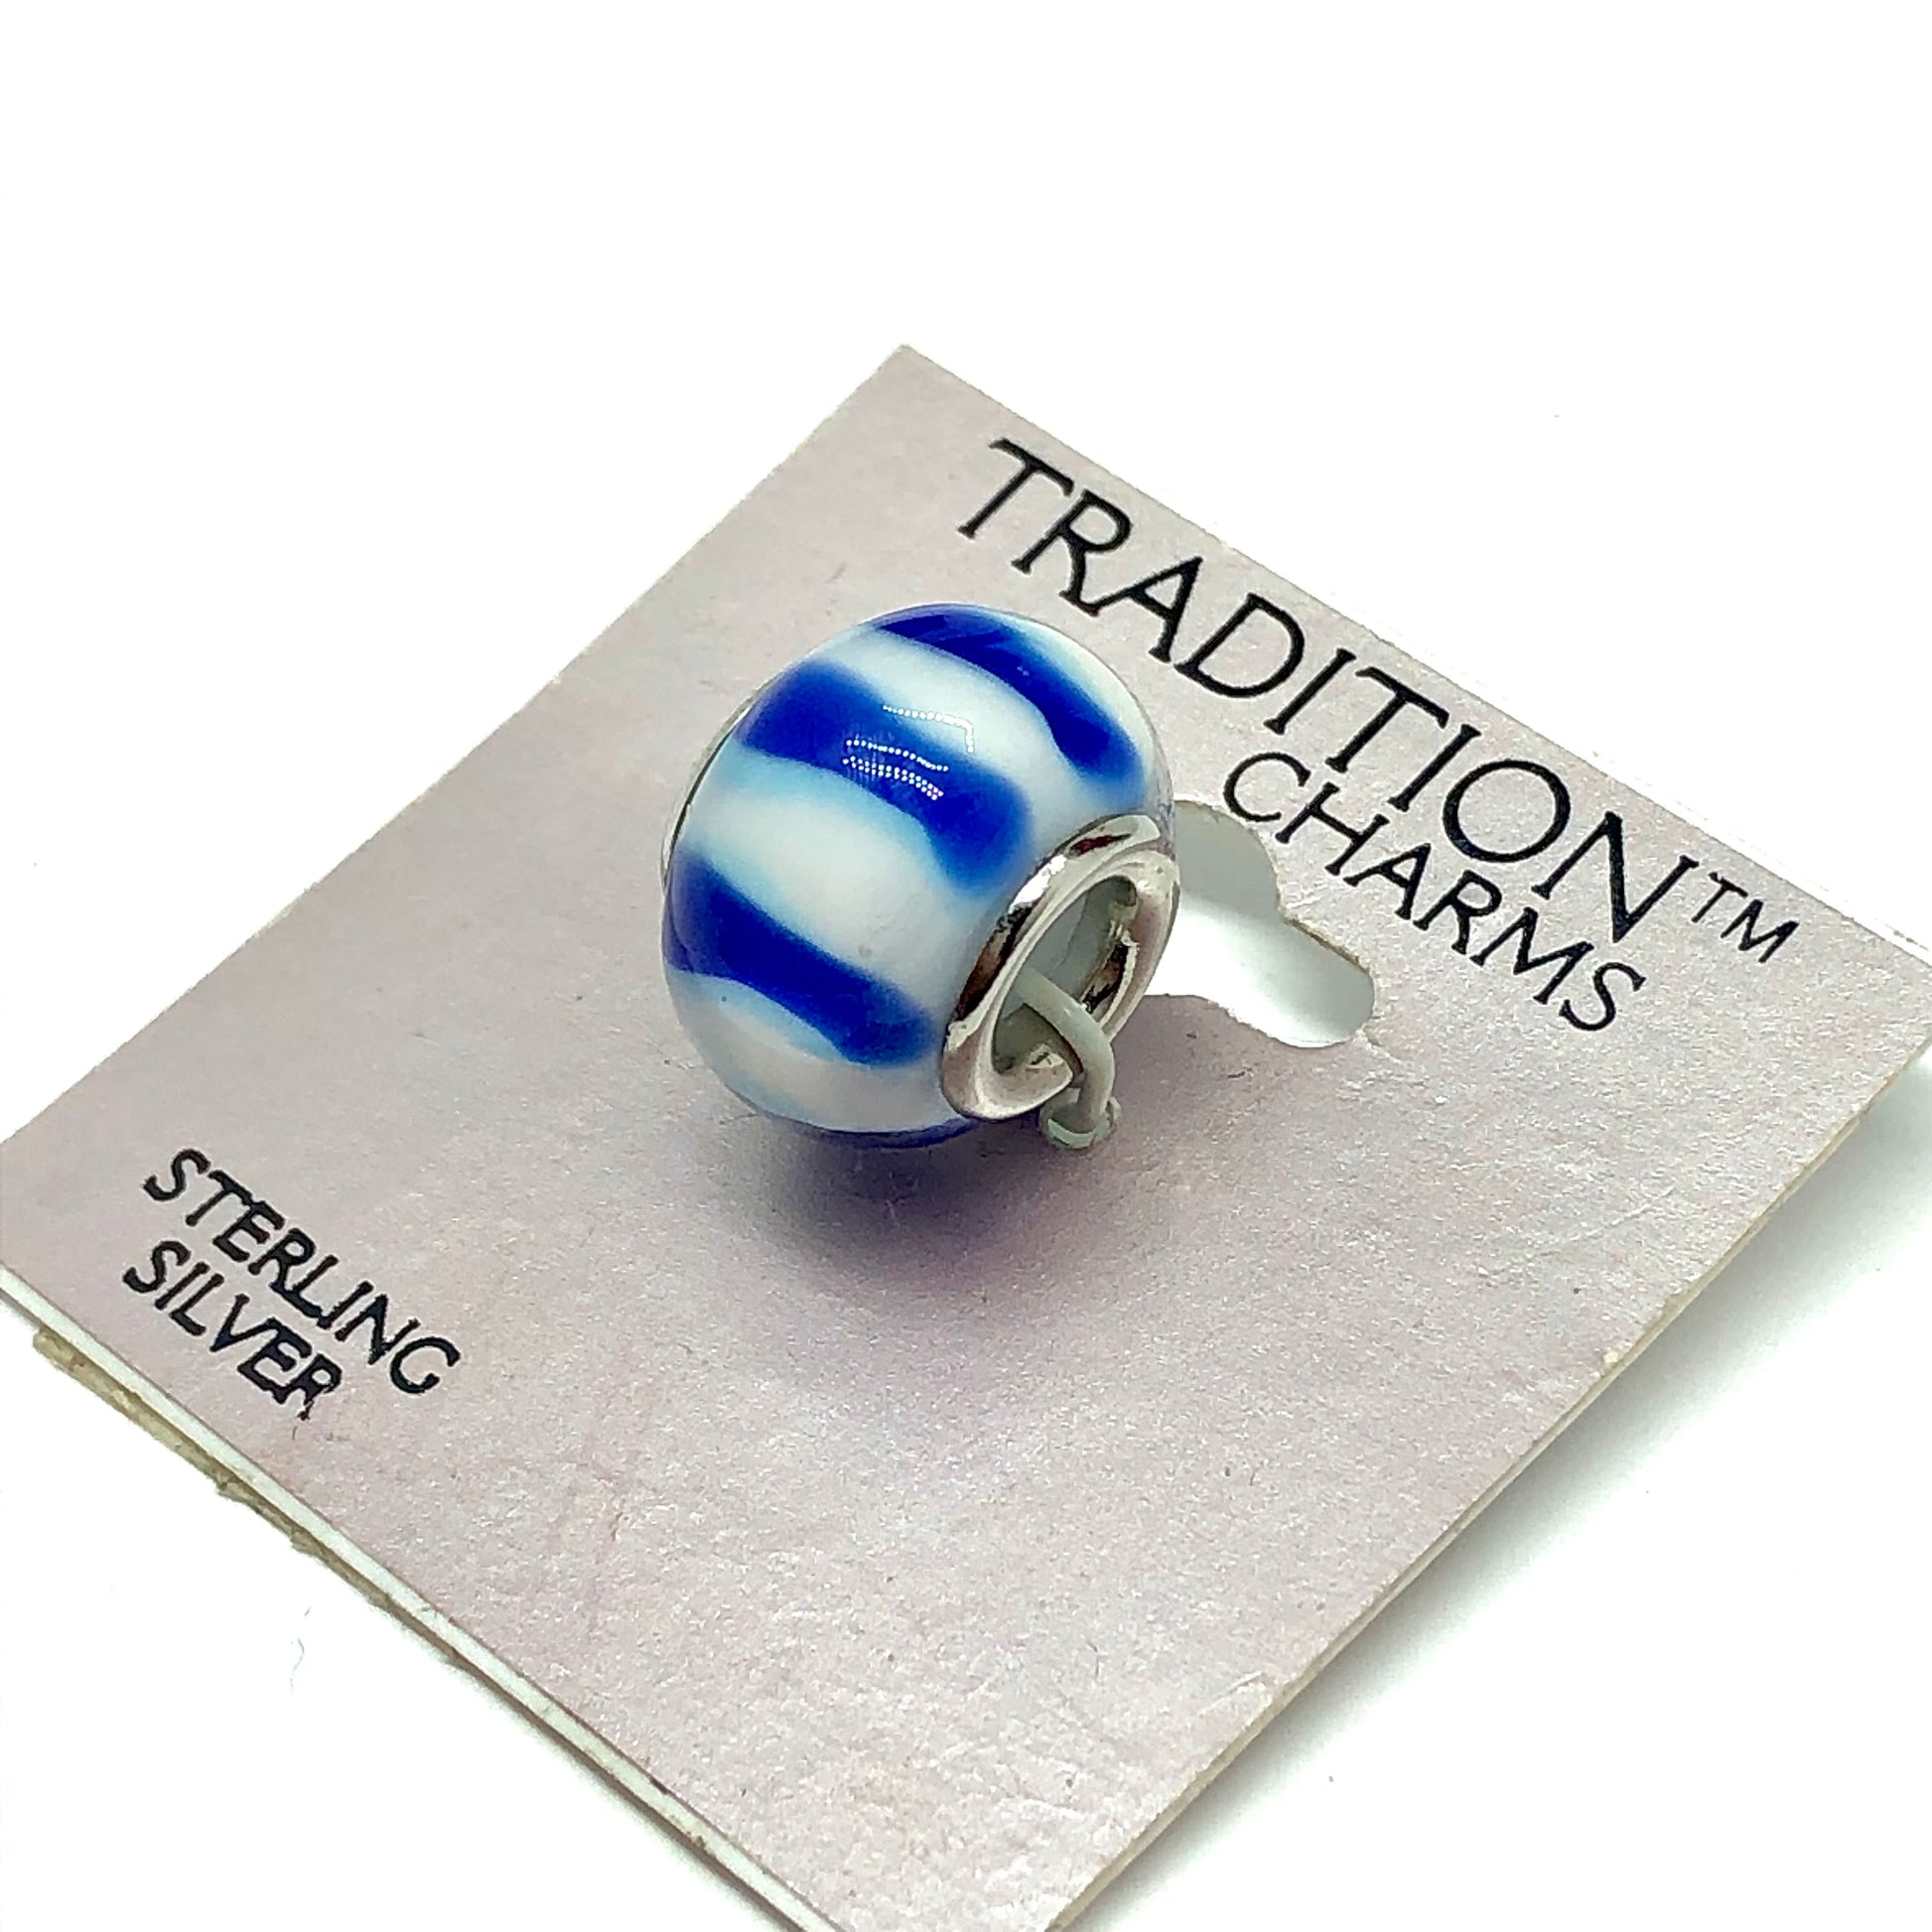 Trendy Charms for Bracelets & Necklaces Blue White Sailor Stripe Design Bead Charm Sterling Silver - Blingschlingers Jewelry